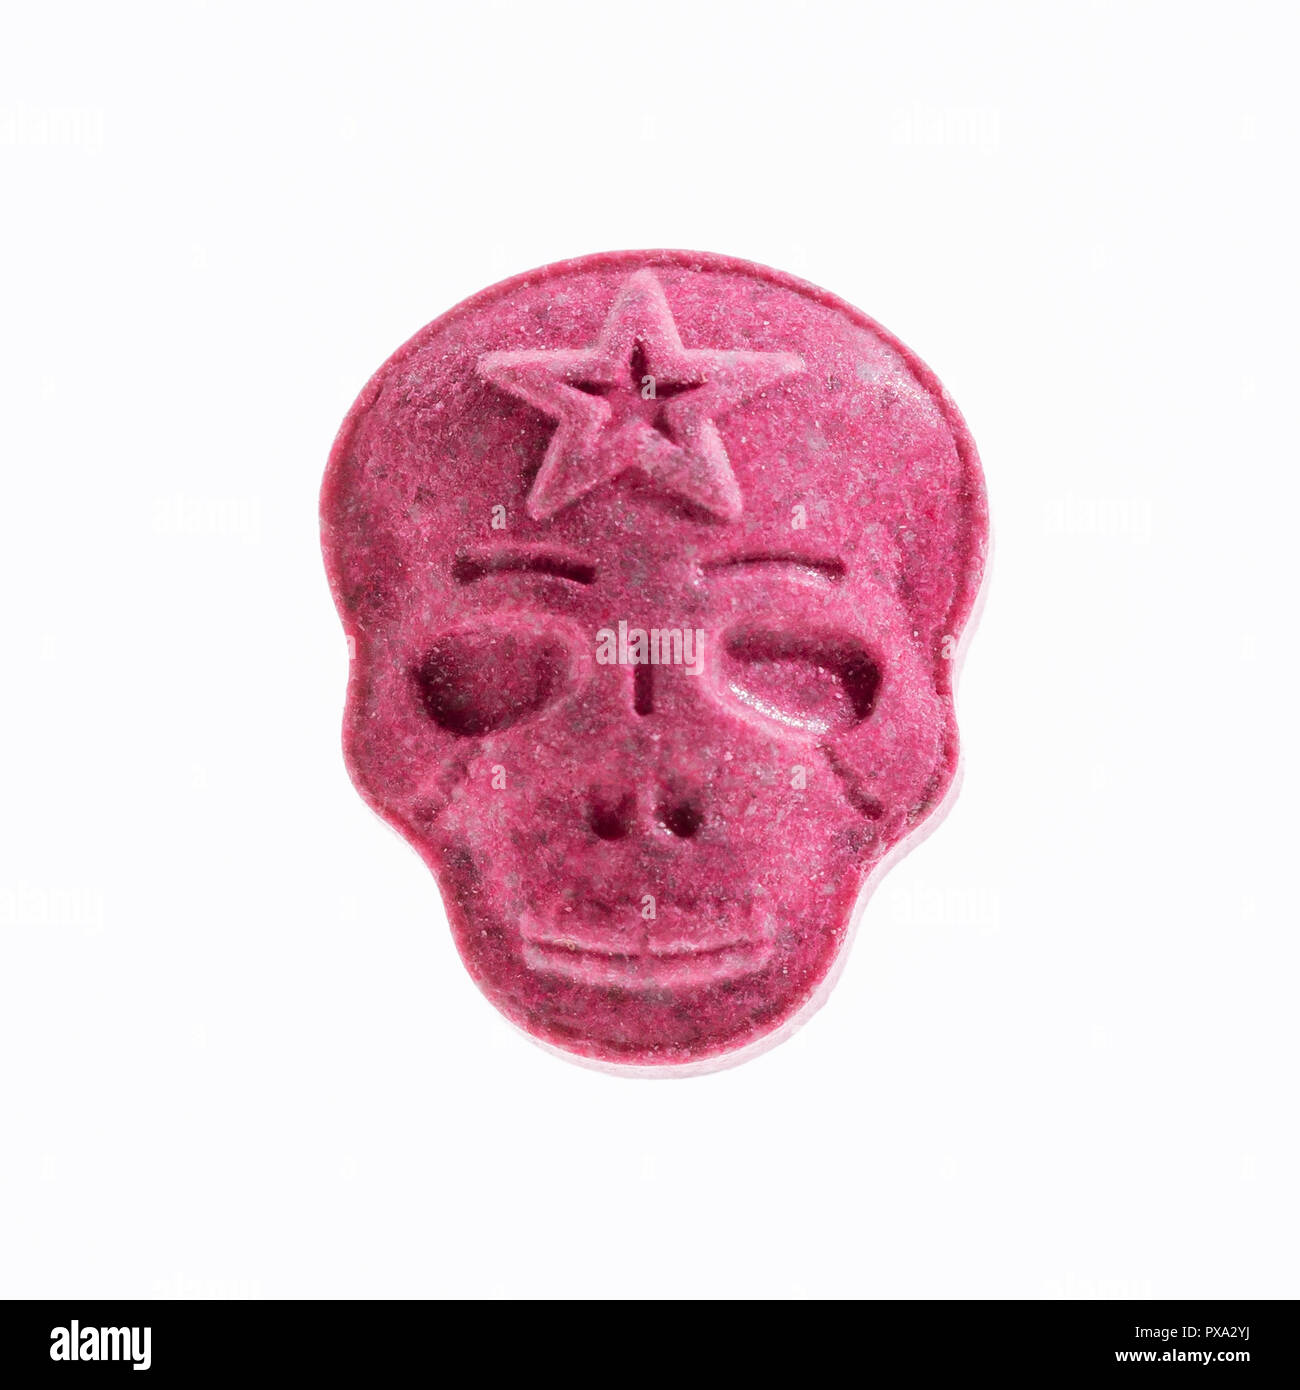 One Red Army Skull, Ecstasy, MDMA or medication pill shaped like a skull isolated on a white background. Stock Photo